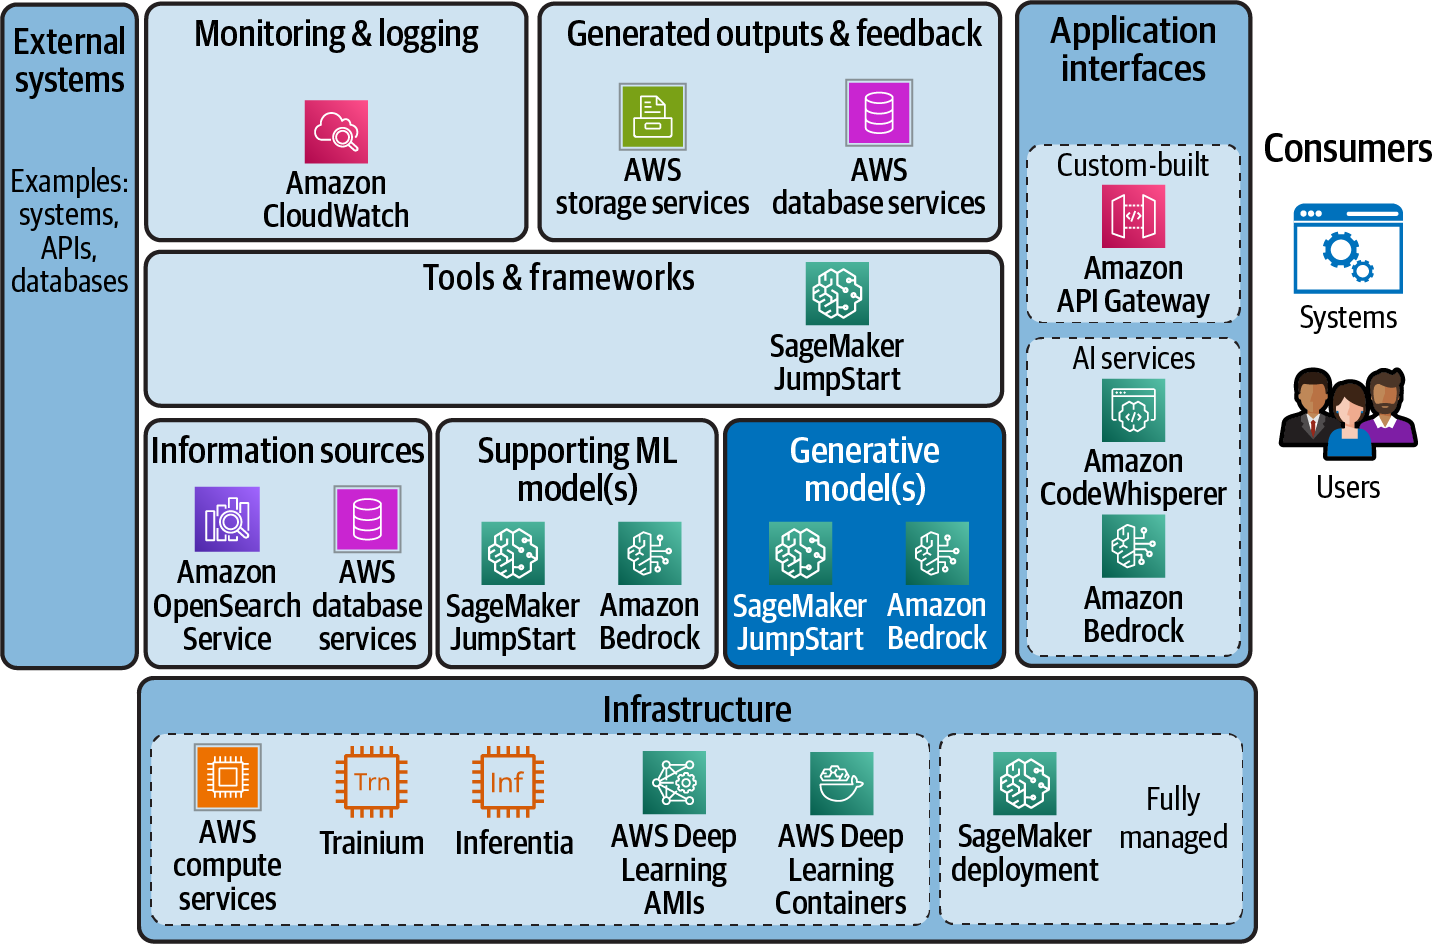 AWS breadth of service to enable customers to build generative AI applications